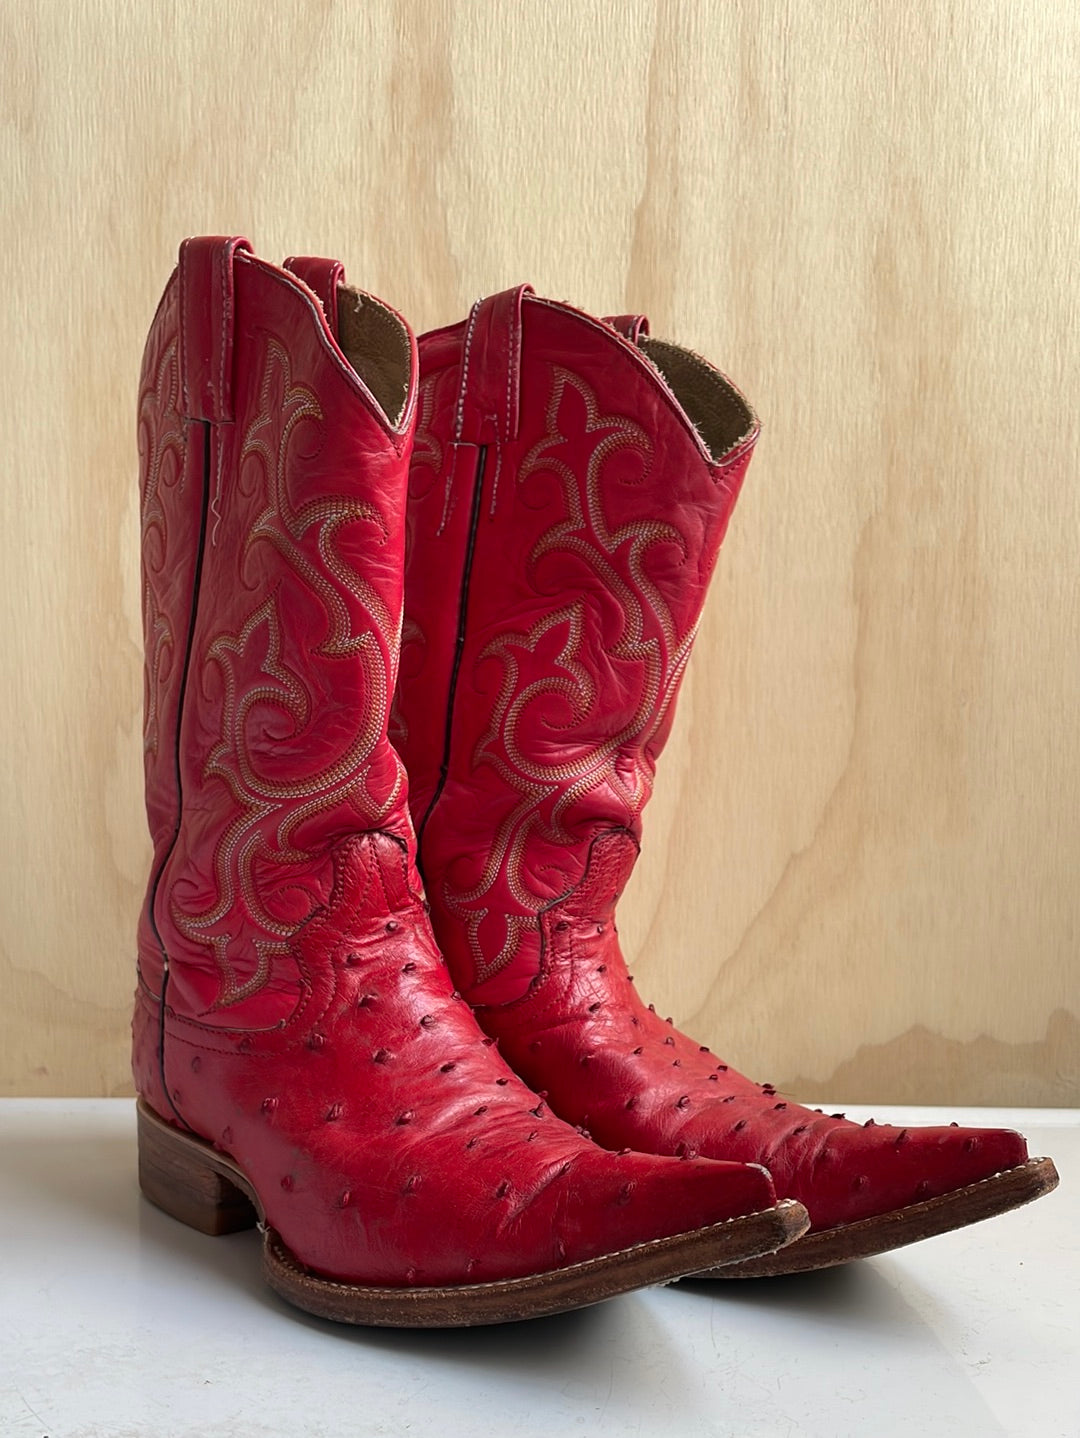 Red Leather Boots - Handmade in Mexico